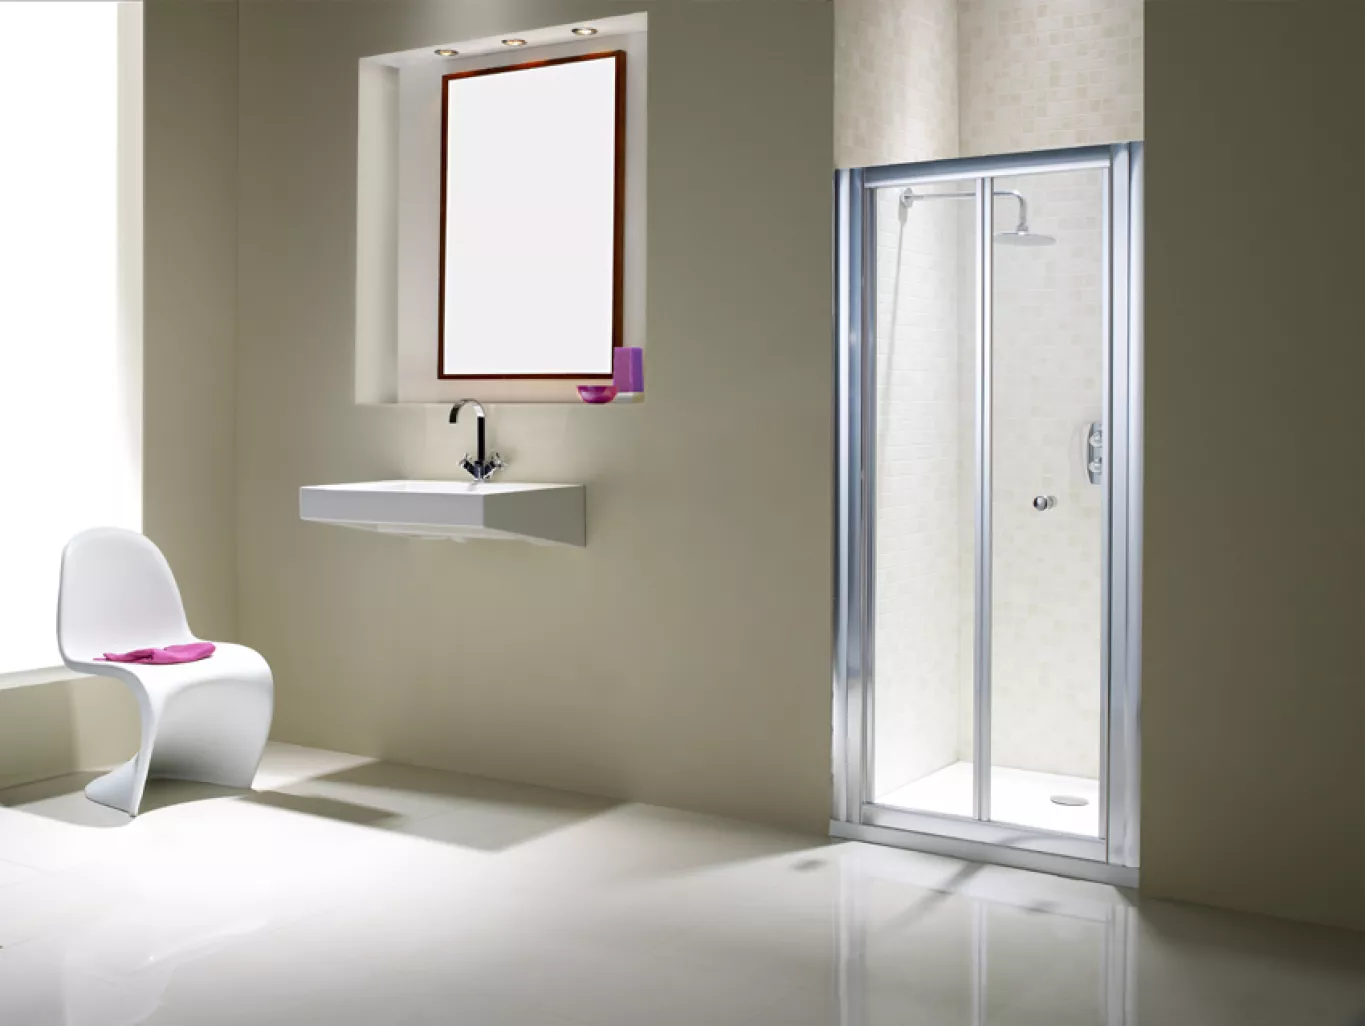 The retro-style Omega Bifold Alcovea Shower Door from Flair Showers' 2000s collection